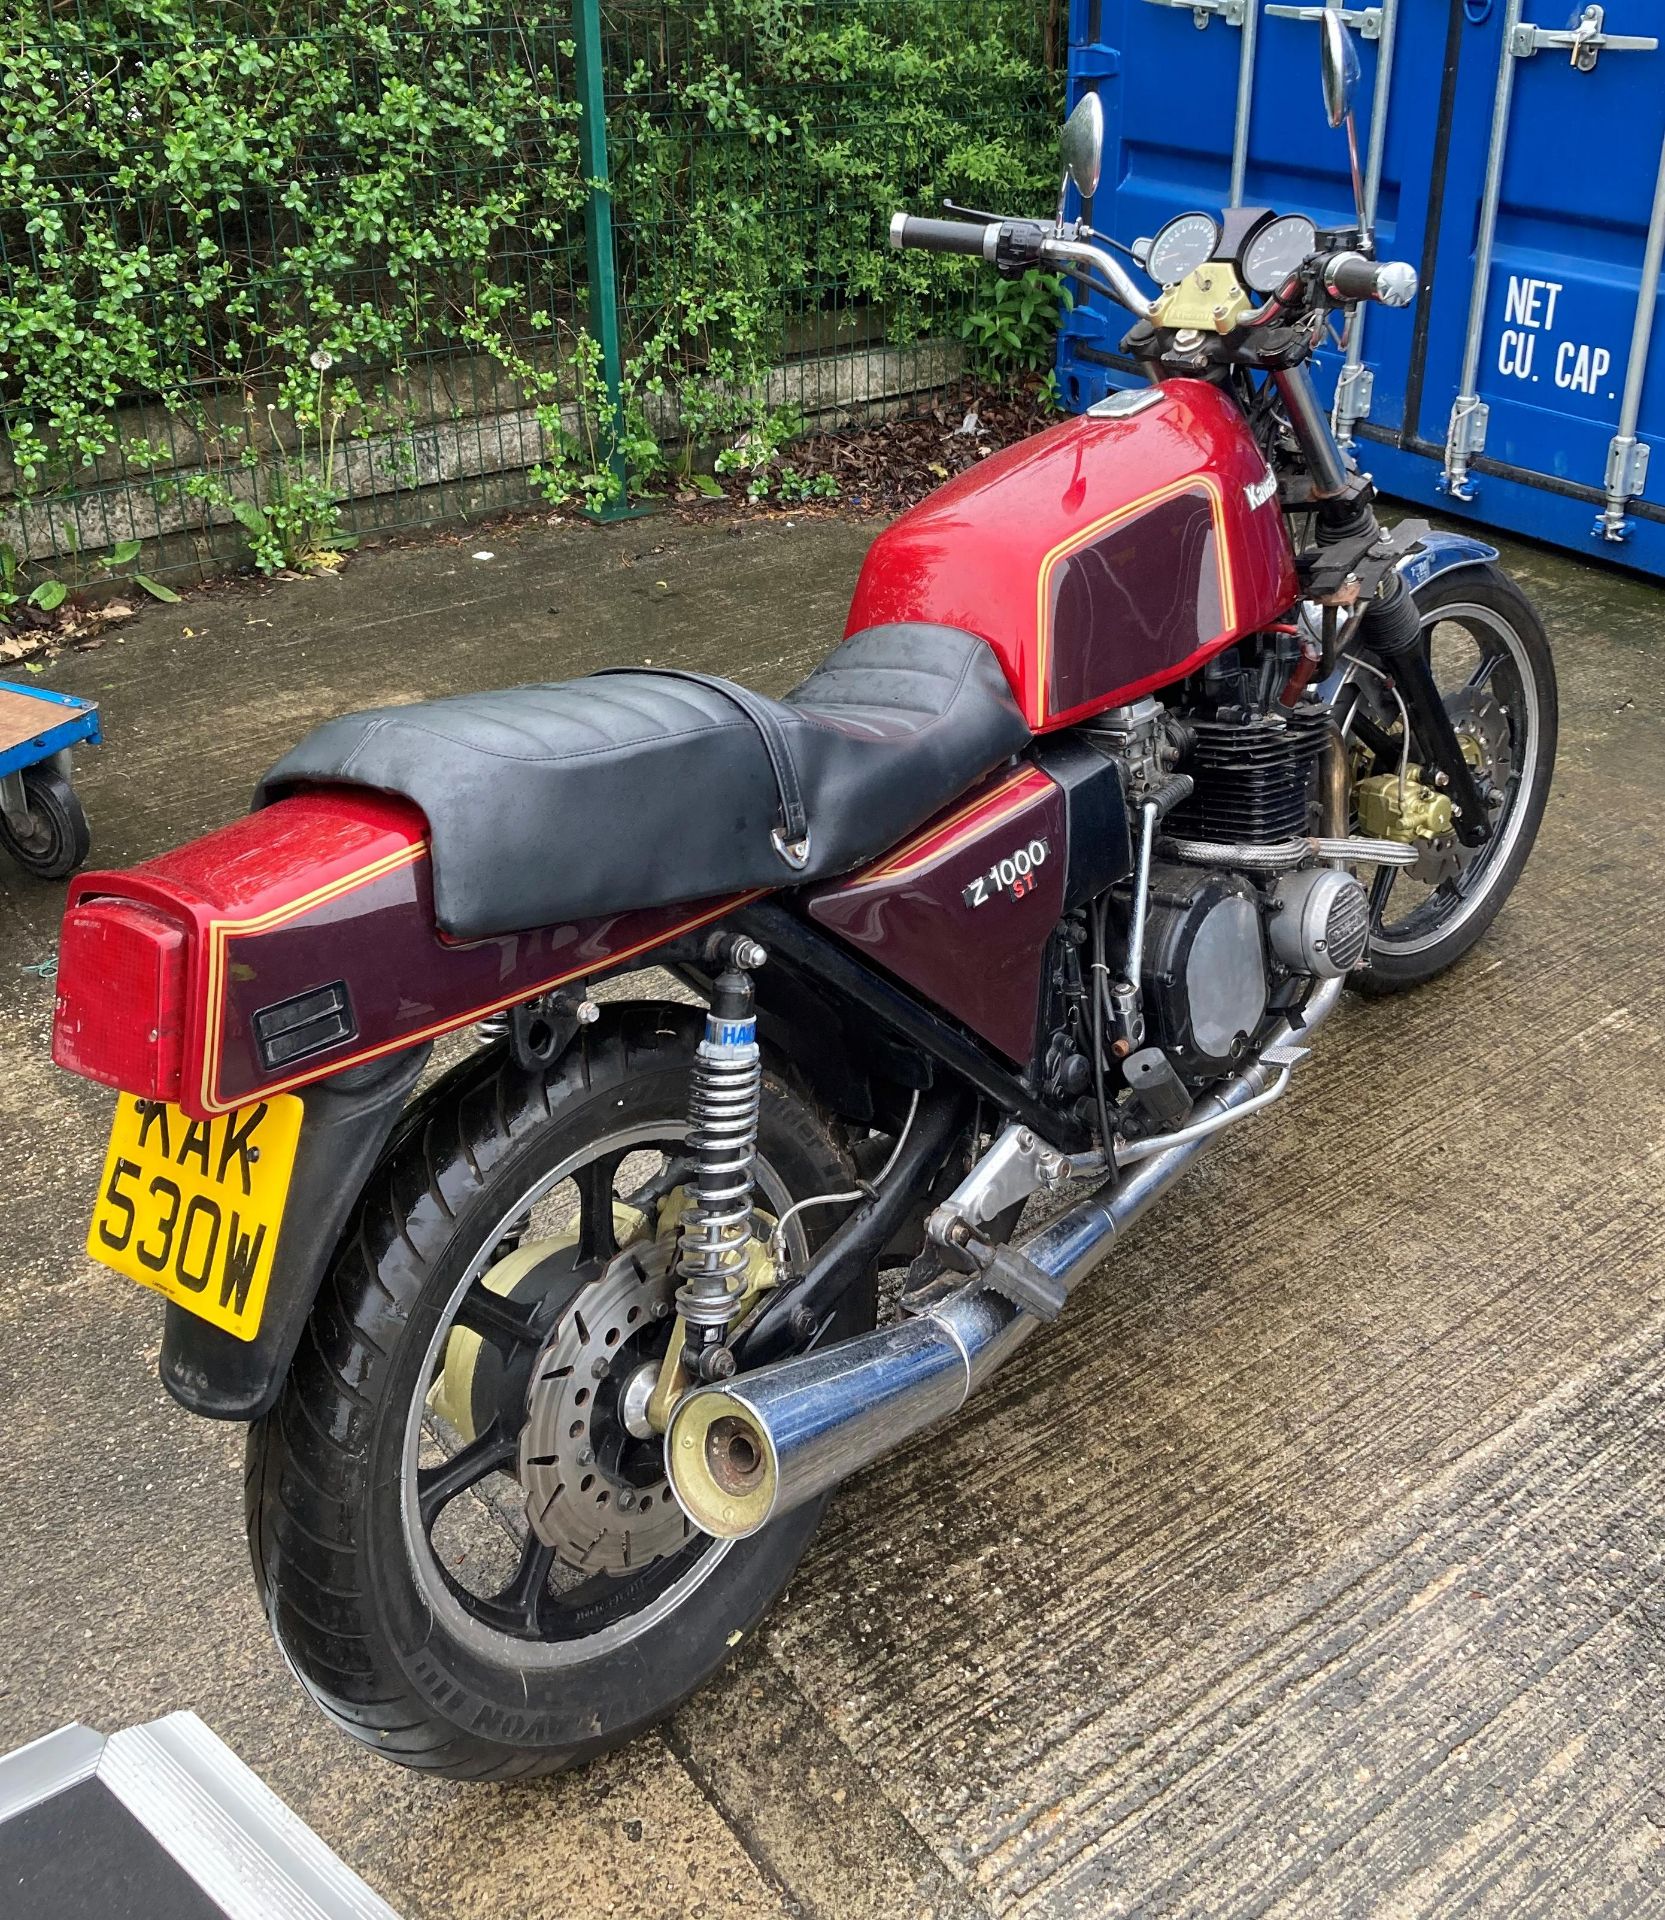 KAWASAKI 1015cc MOTORCYCLE - Petrol - Red. Sold as a project restoration/spares/repairs. - Image 9 of 11